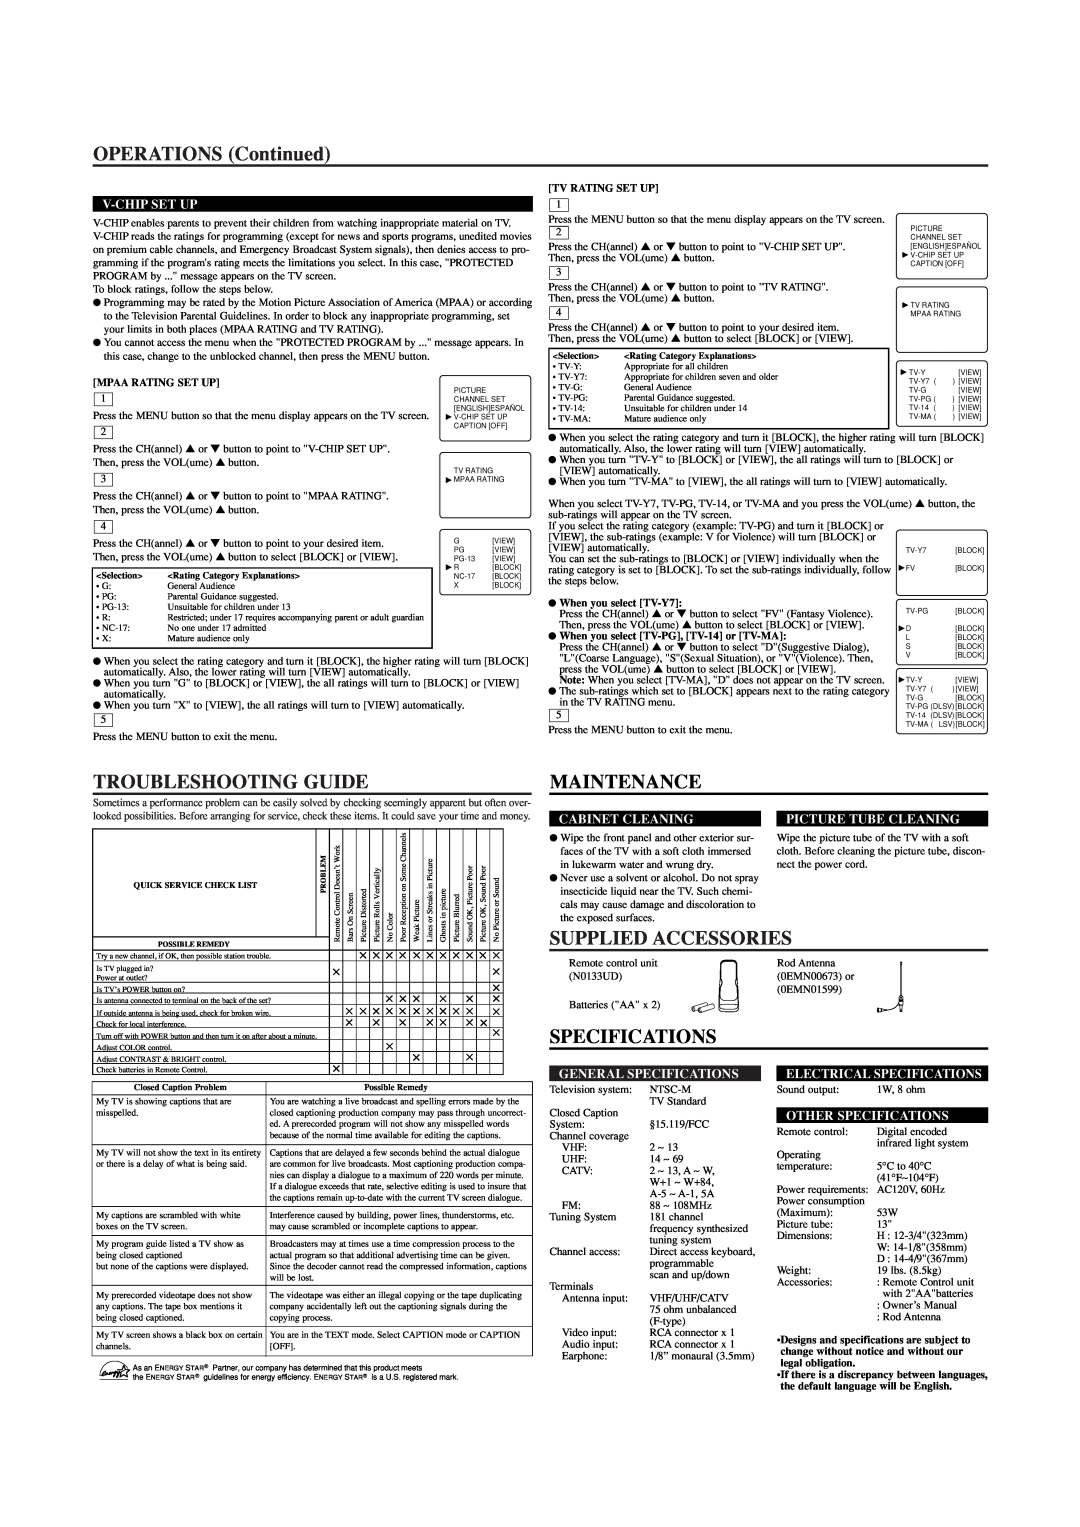 Sylvania W6413TC OPERATIONS Continued, Troubleshooting Guide, Maintenance, Supplied Accessories, Specifications 